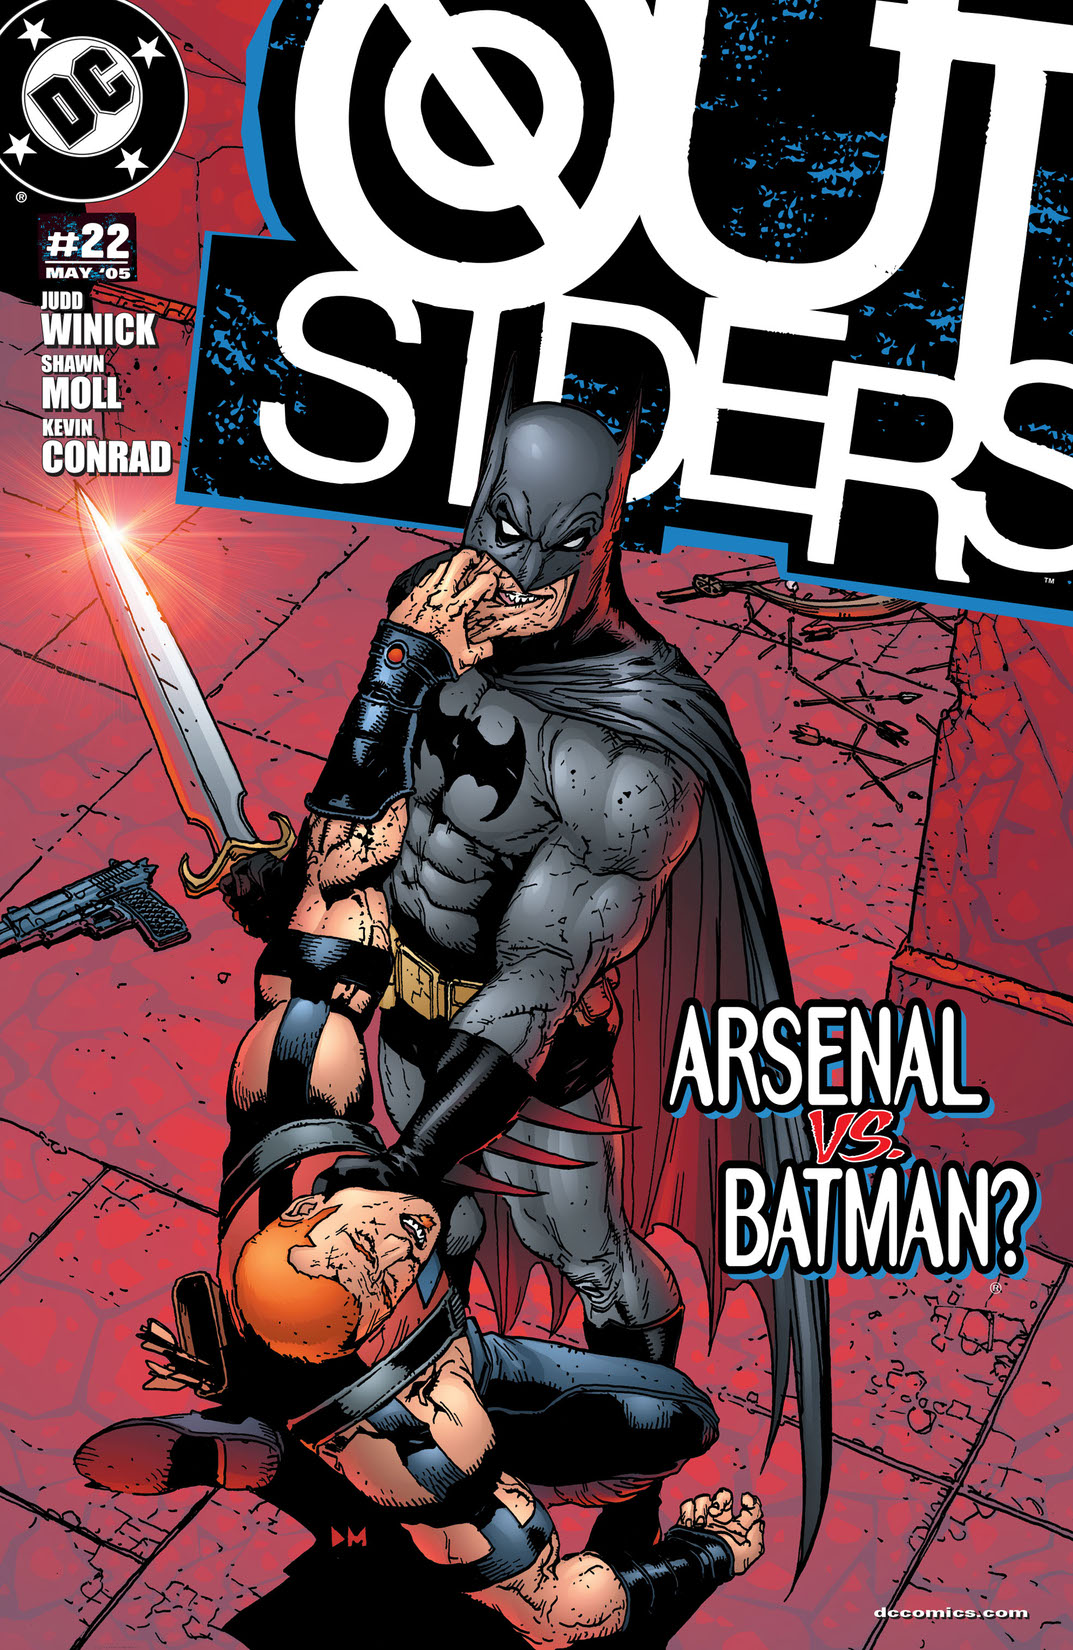 Outsiders (2003-) #22 preview images